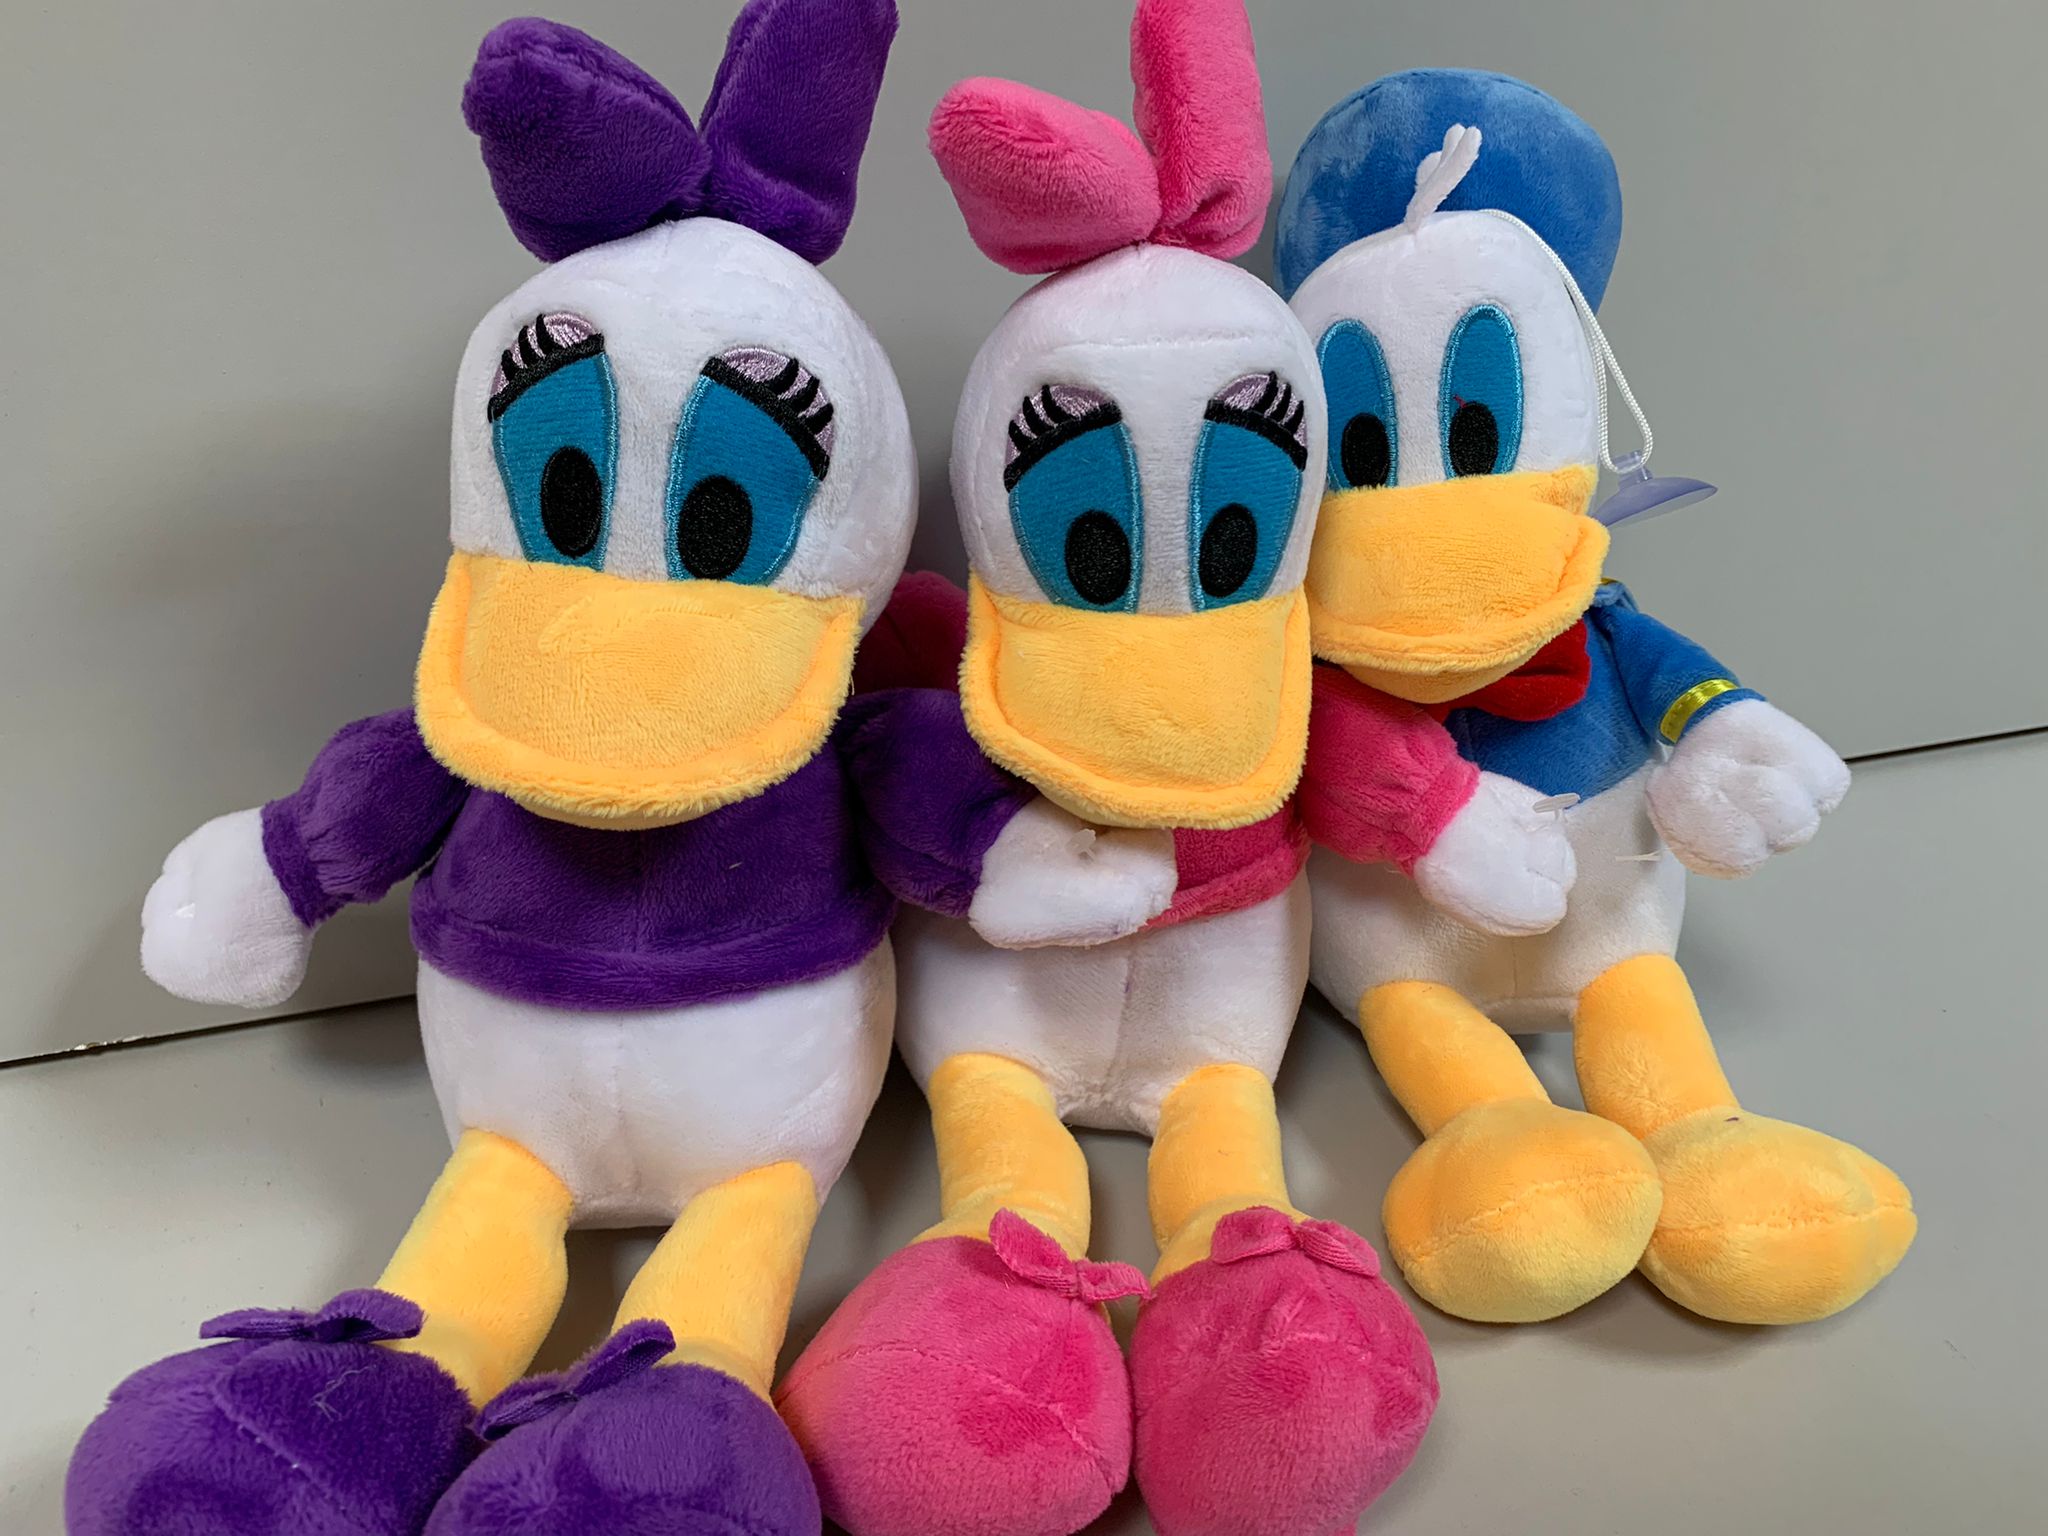 A set of plush characters from Donald the duck